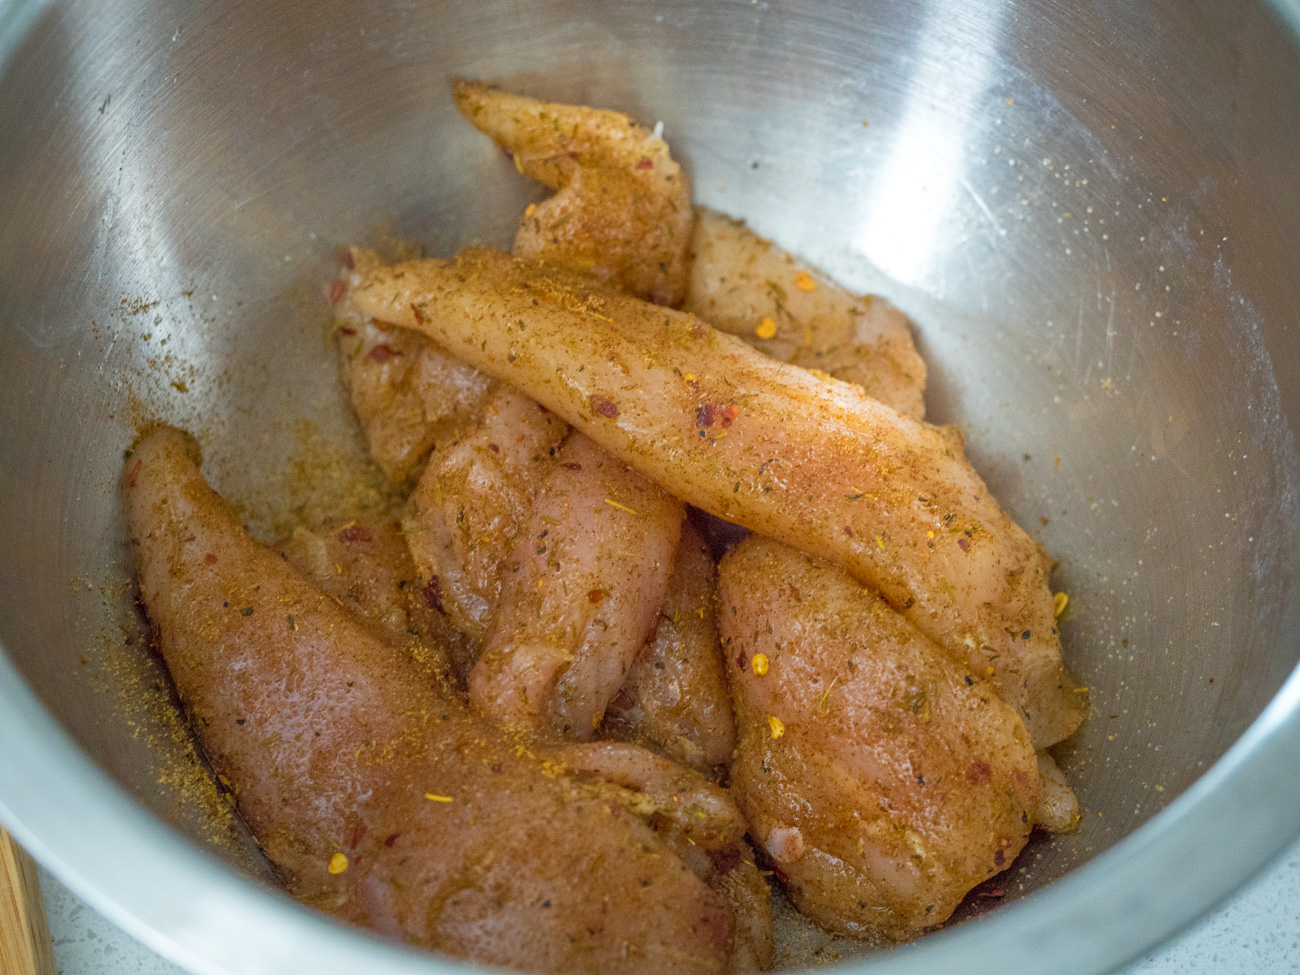 Place chicken in a bowl with jerk chicken mixture. Make sure all pieces are coated. Allow to marinate in the refrigerator (covered) for at least an hour or up to overnight.